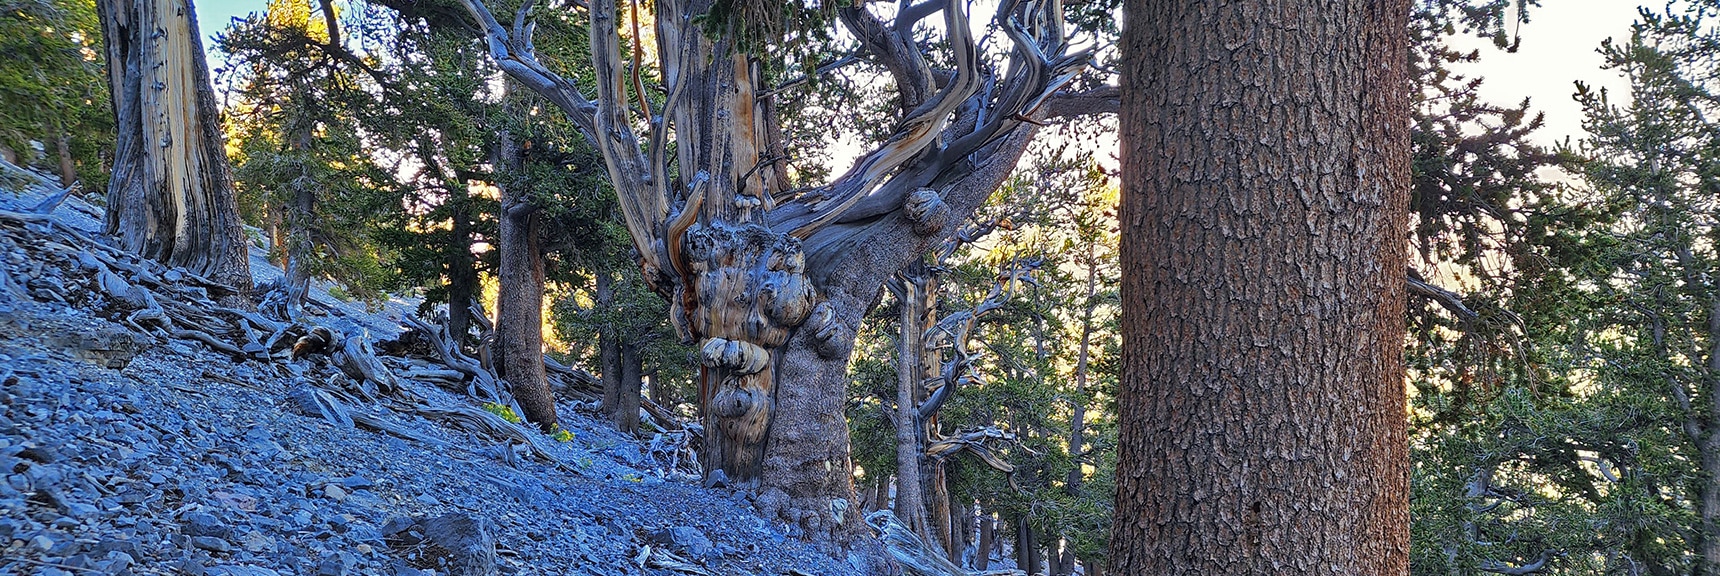 Many Beautiful Ancient Bristlecone Pines on the Stretch | Mummy Mountain Grand Crossing | Lee Canyon to Deer Creek Road | Mt Charleston Wilderness | Spring Mountains, Nevada |